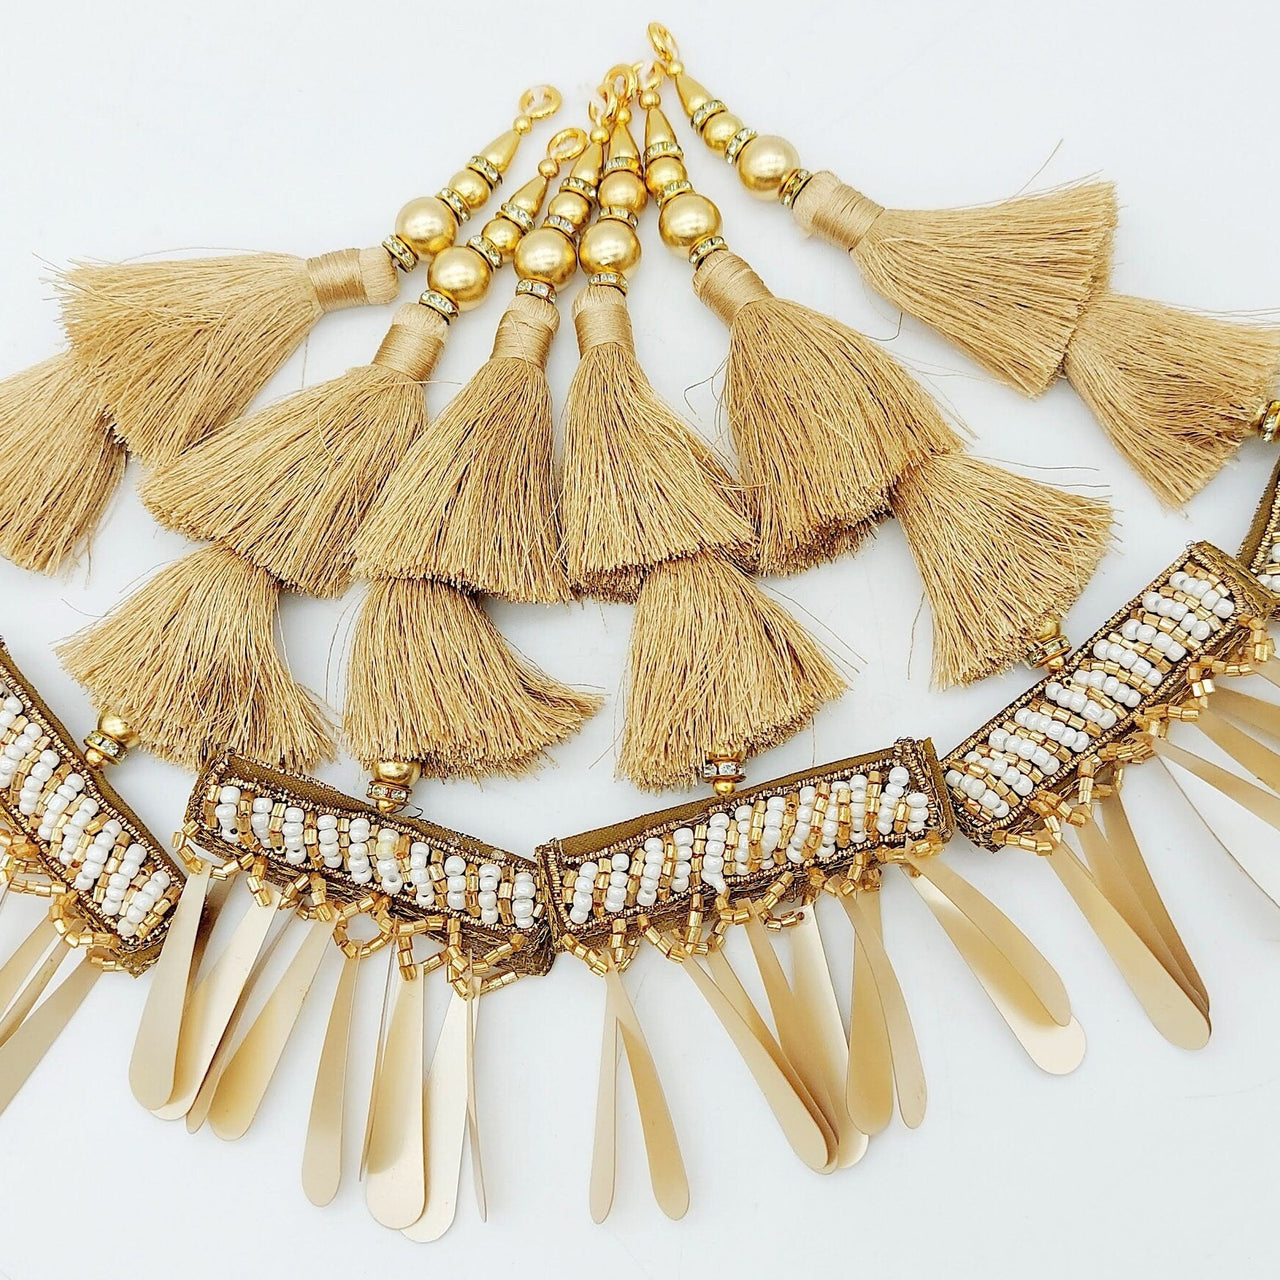 Gold Tassels With Long Gold Sequins And White and Gold Seed Pearl Beads, Beaded Thread Tassel Charms, 2 Pcs